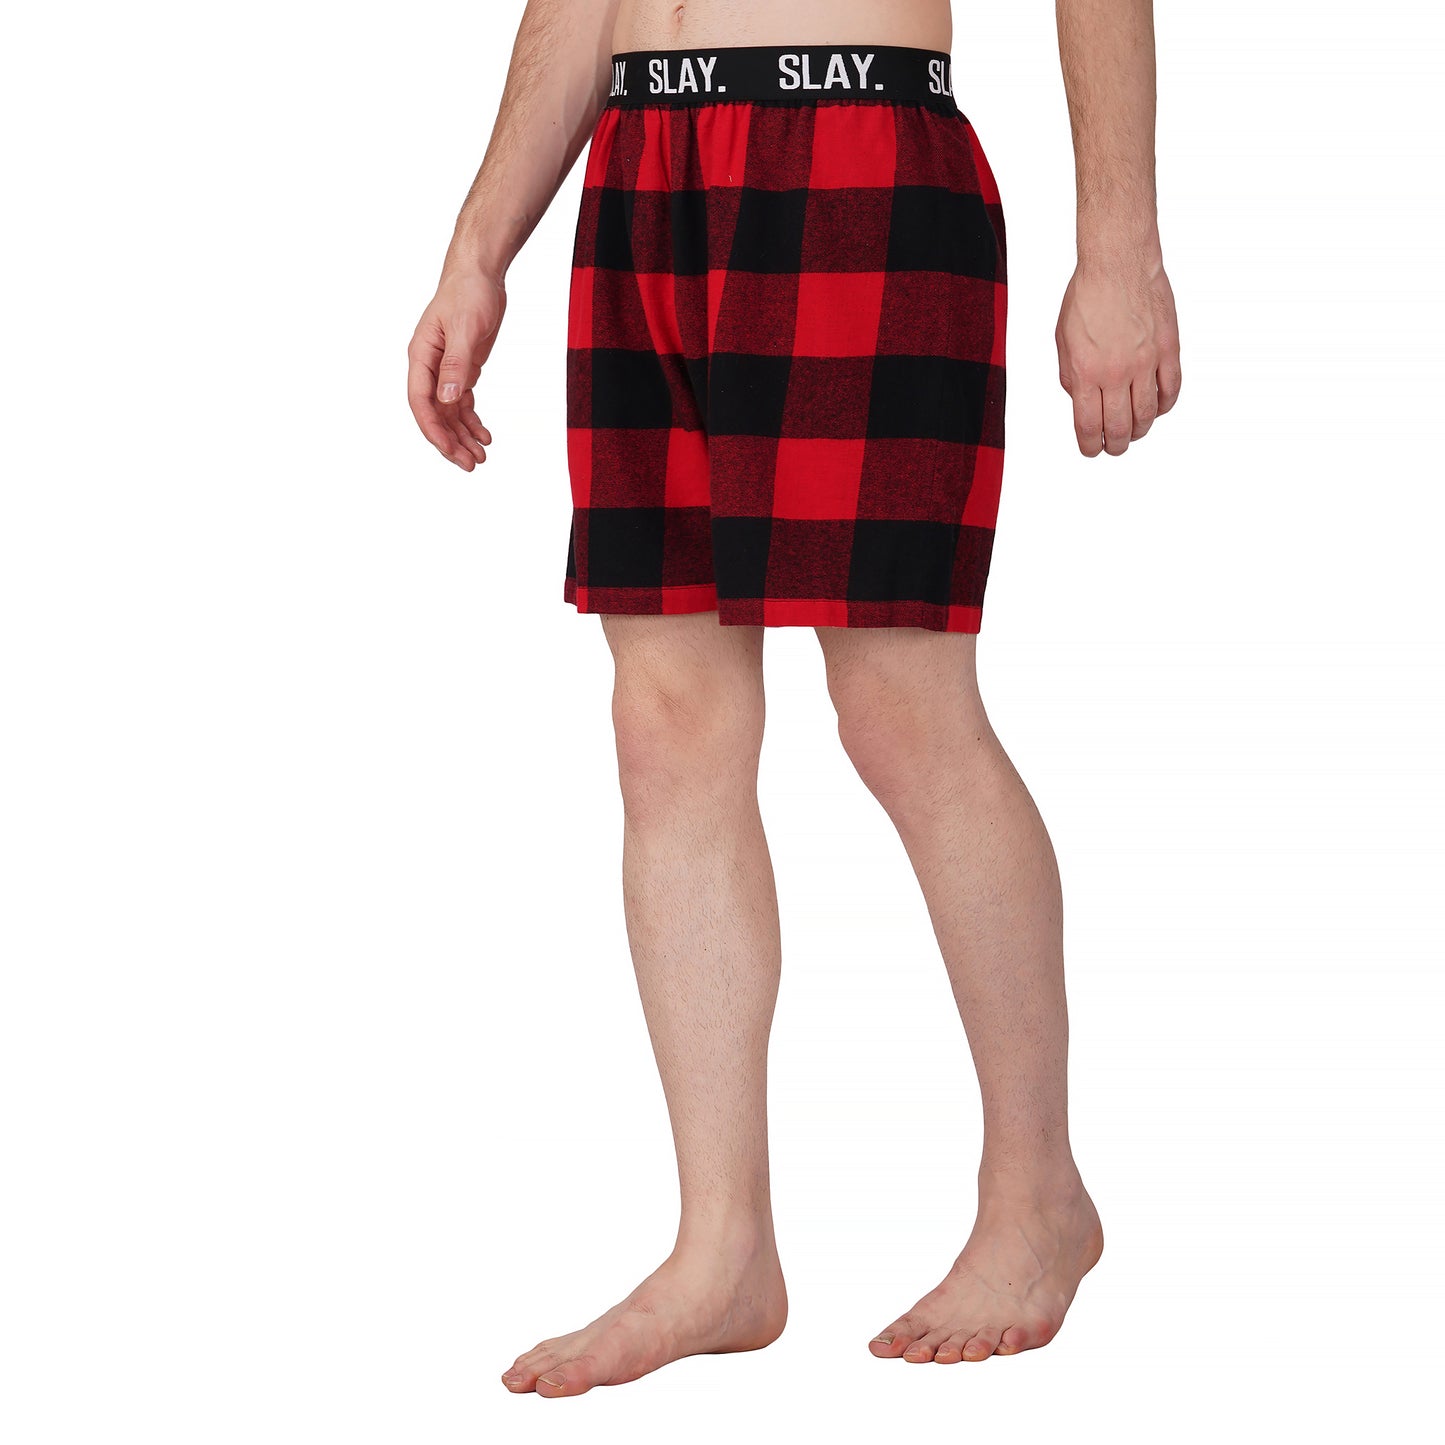 SLAY. Men's Red Check Boxers